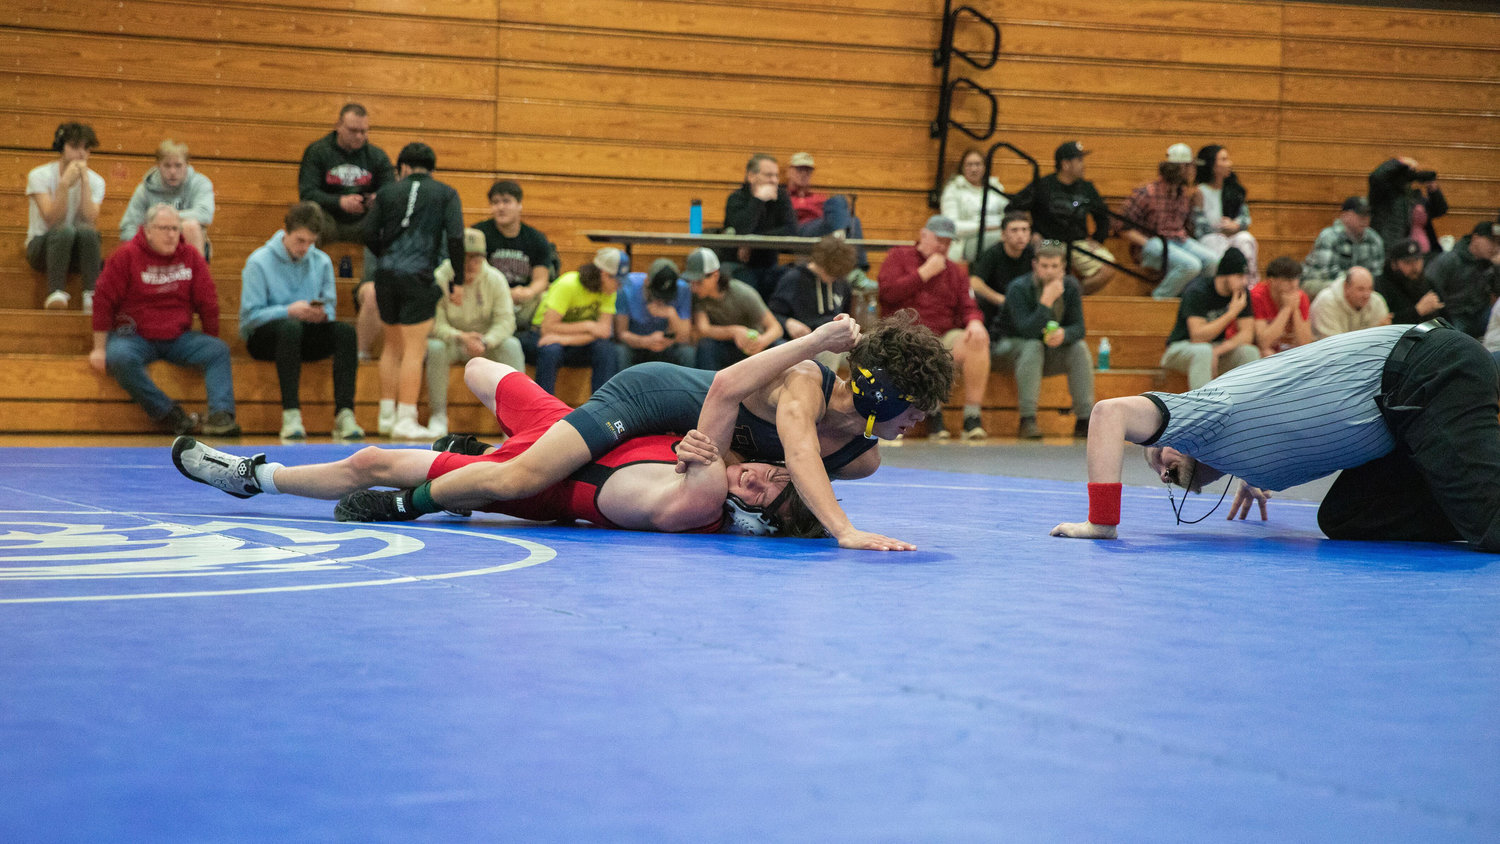 Yelm’s Wesley Thompson prepares for impact while wrestling at 113 in Chehalis Saturday night during the Bearcat Invitational.